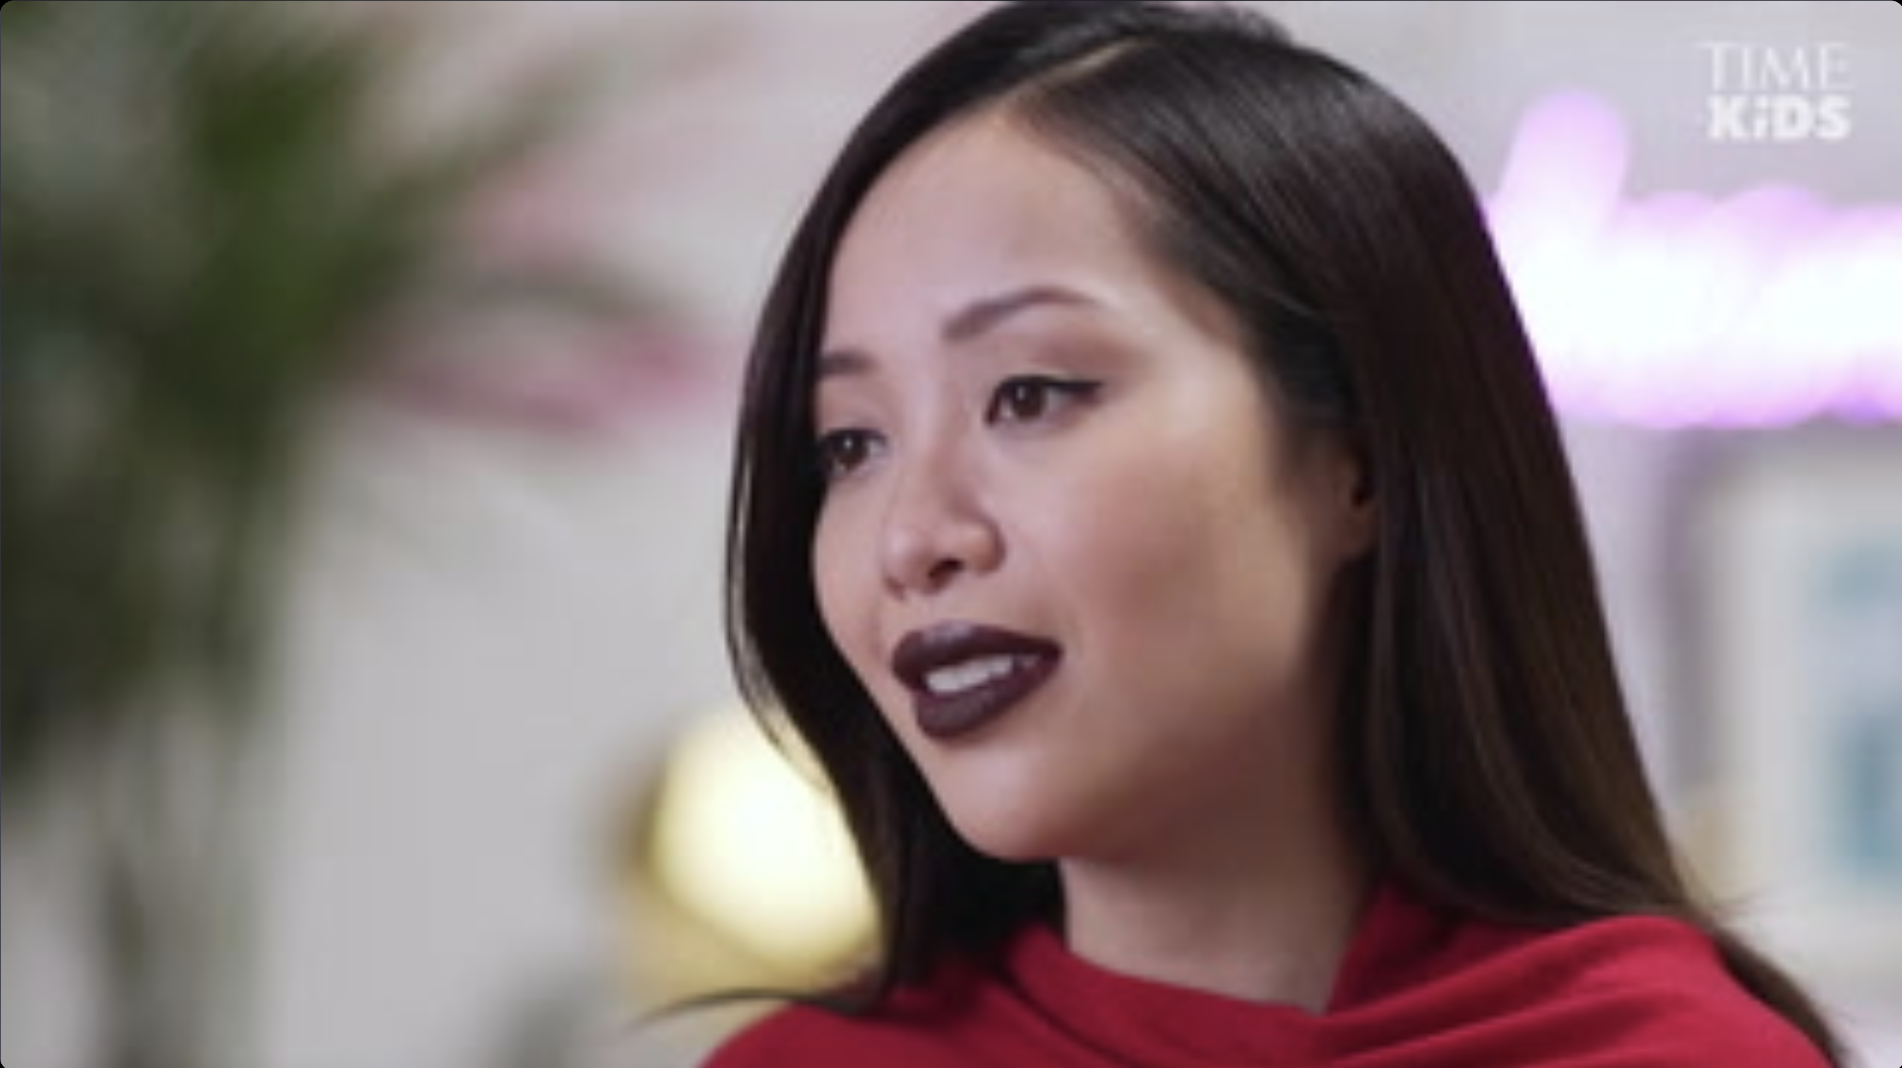 Still of Michelle Phan speaking about her brand.